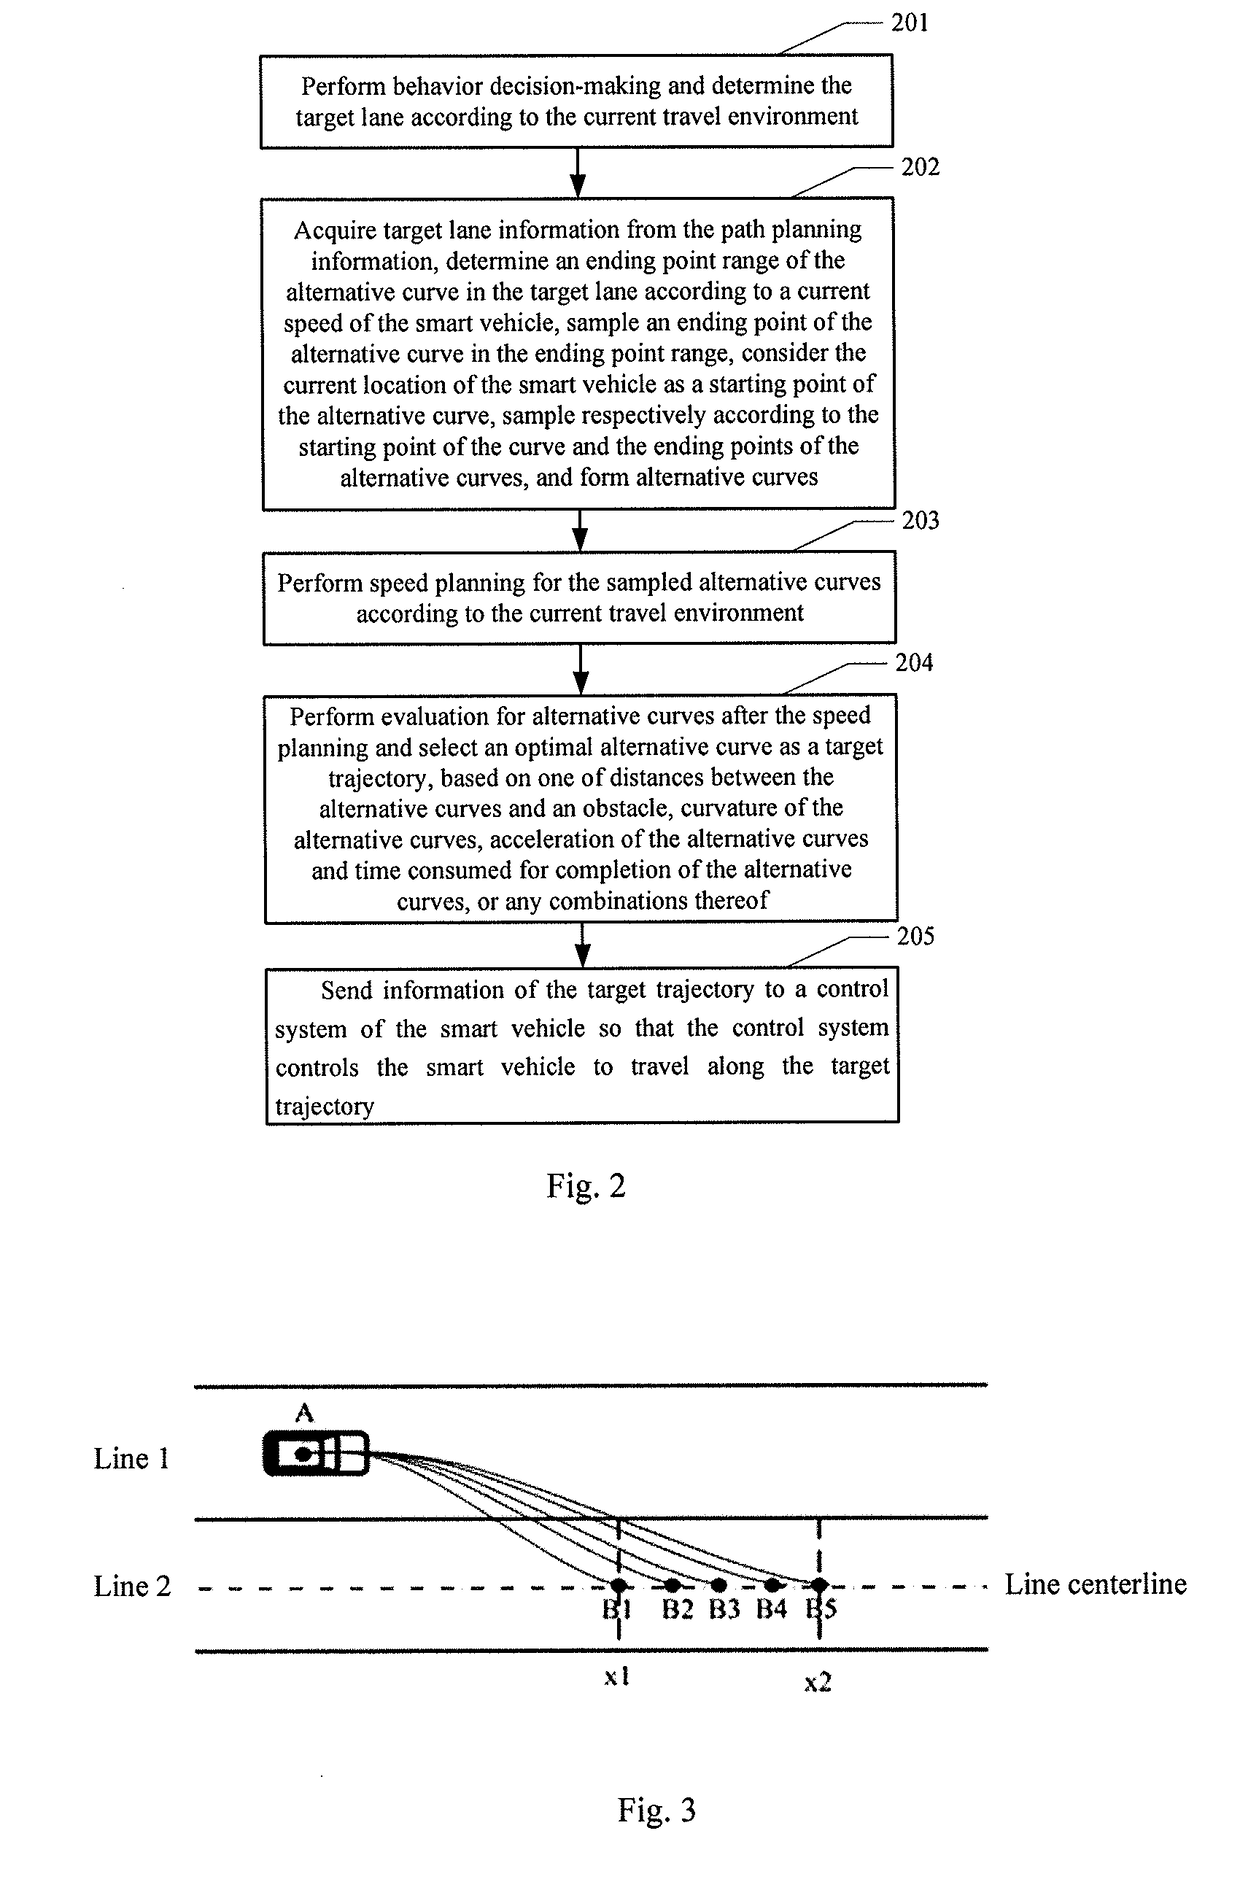 Local trajectory planning method and apparatus for smart vehicles